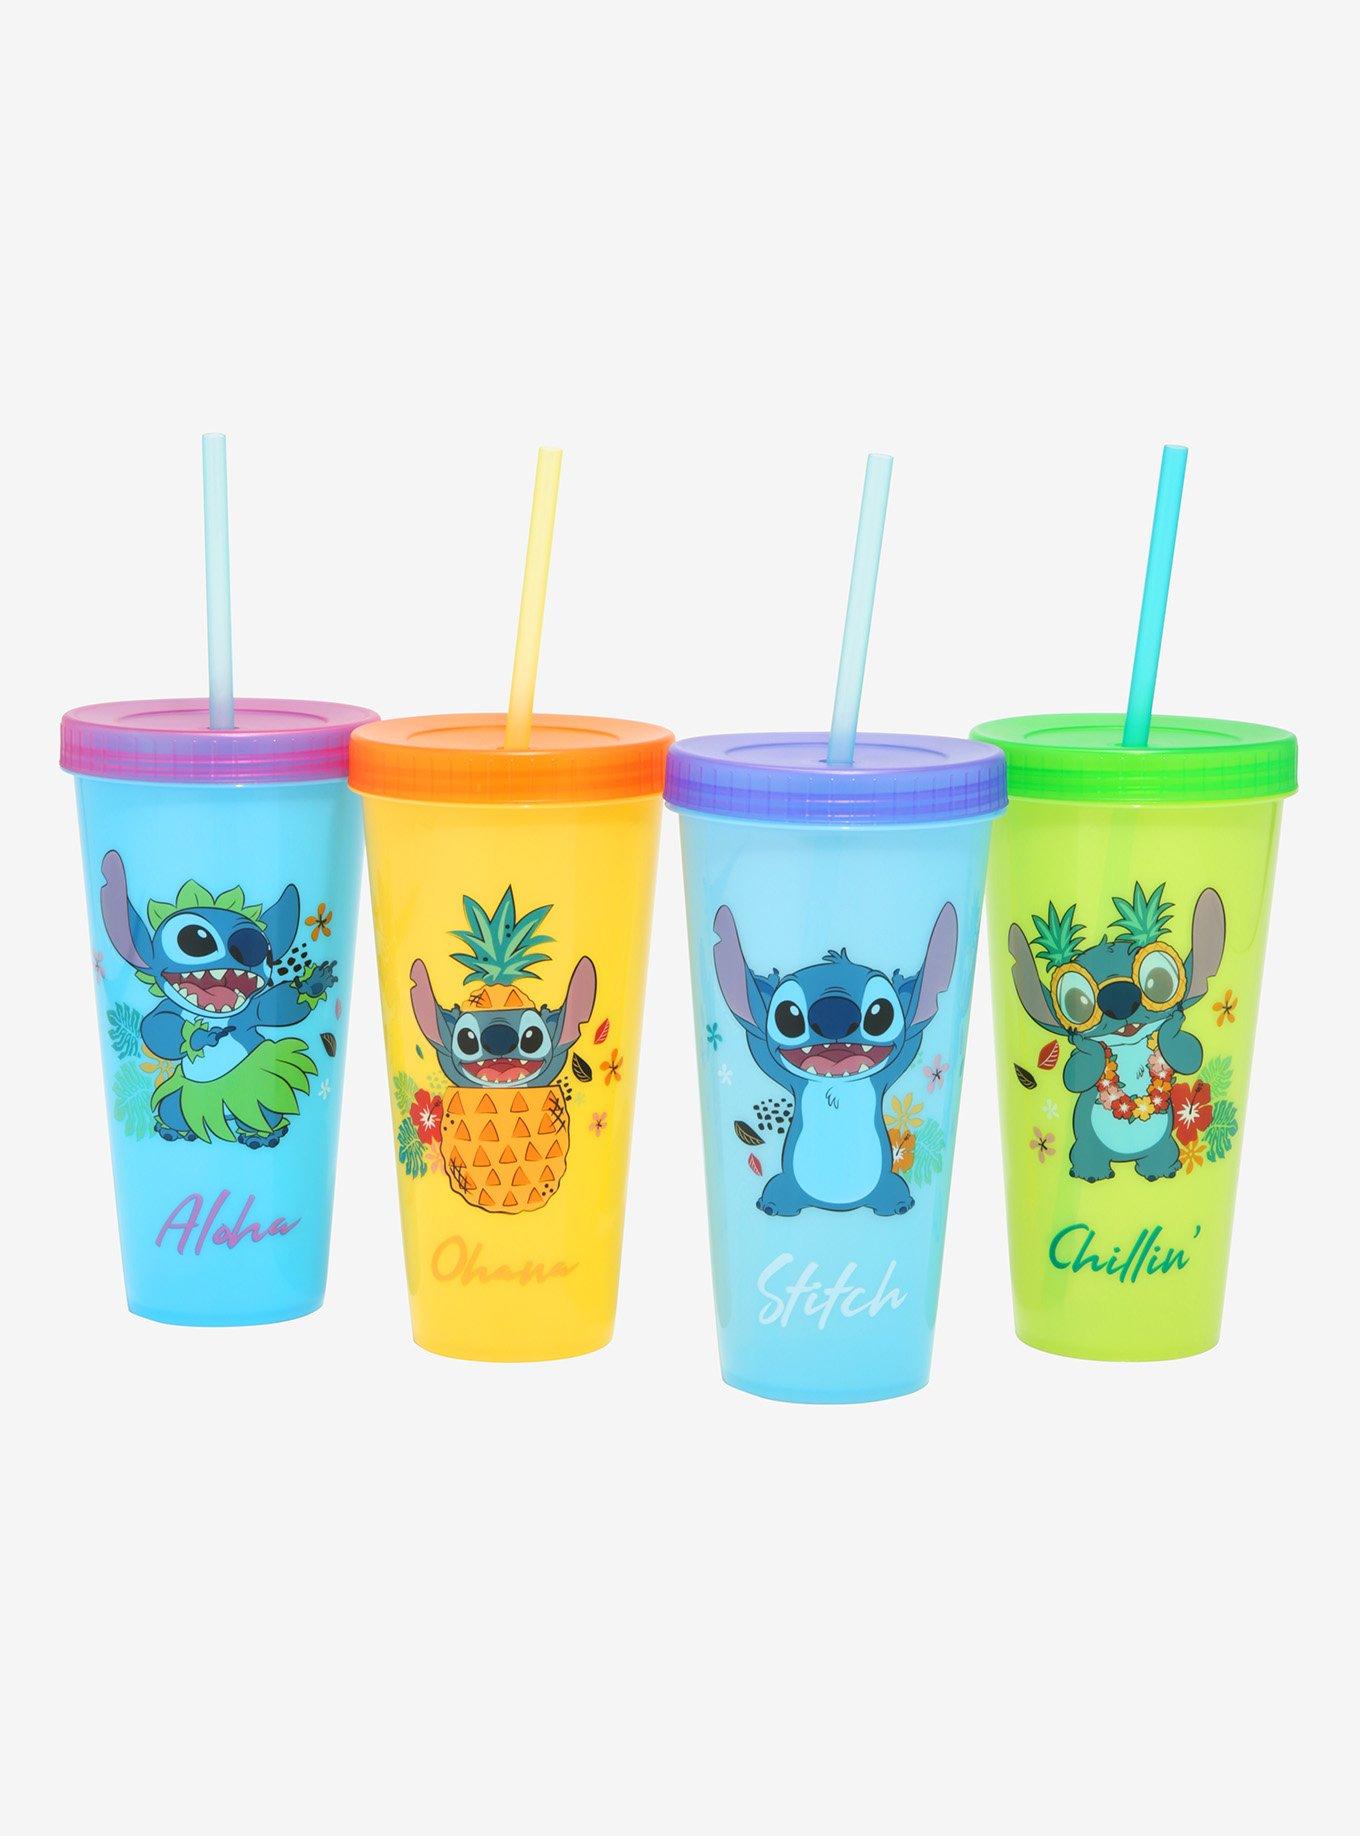 Disney Store Alice in Wonderland Acrylic Tumbler with Color Change